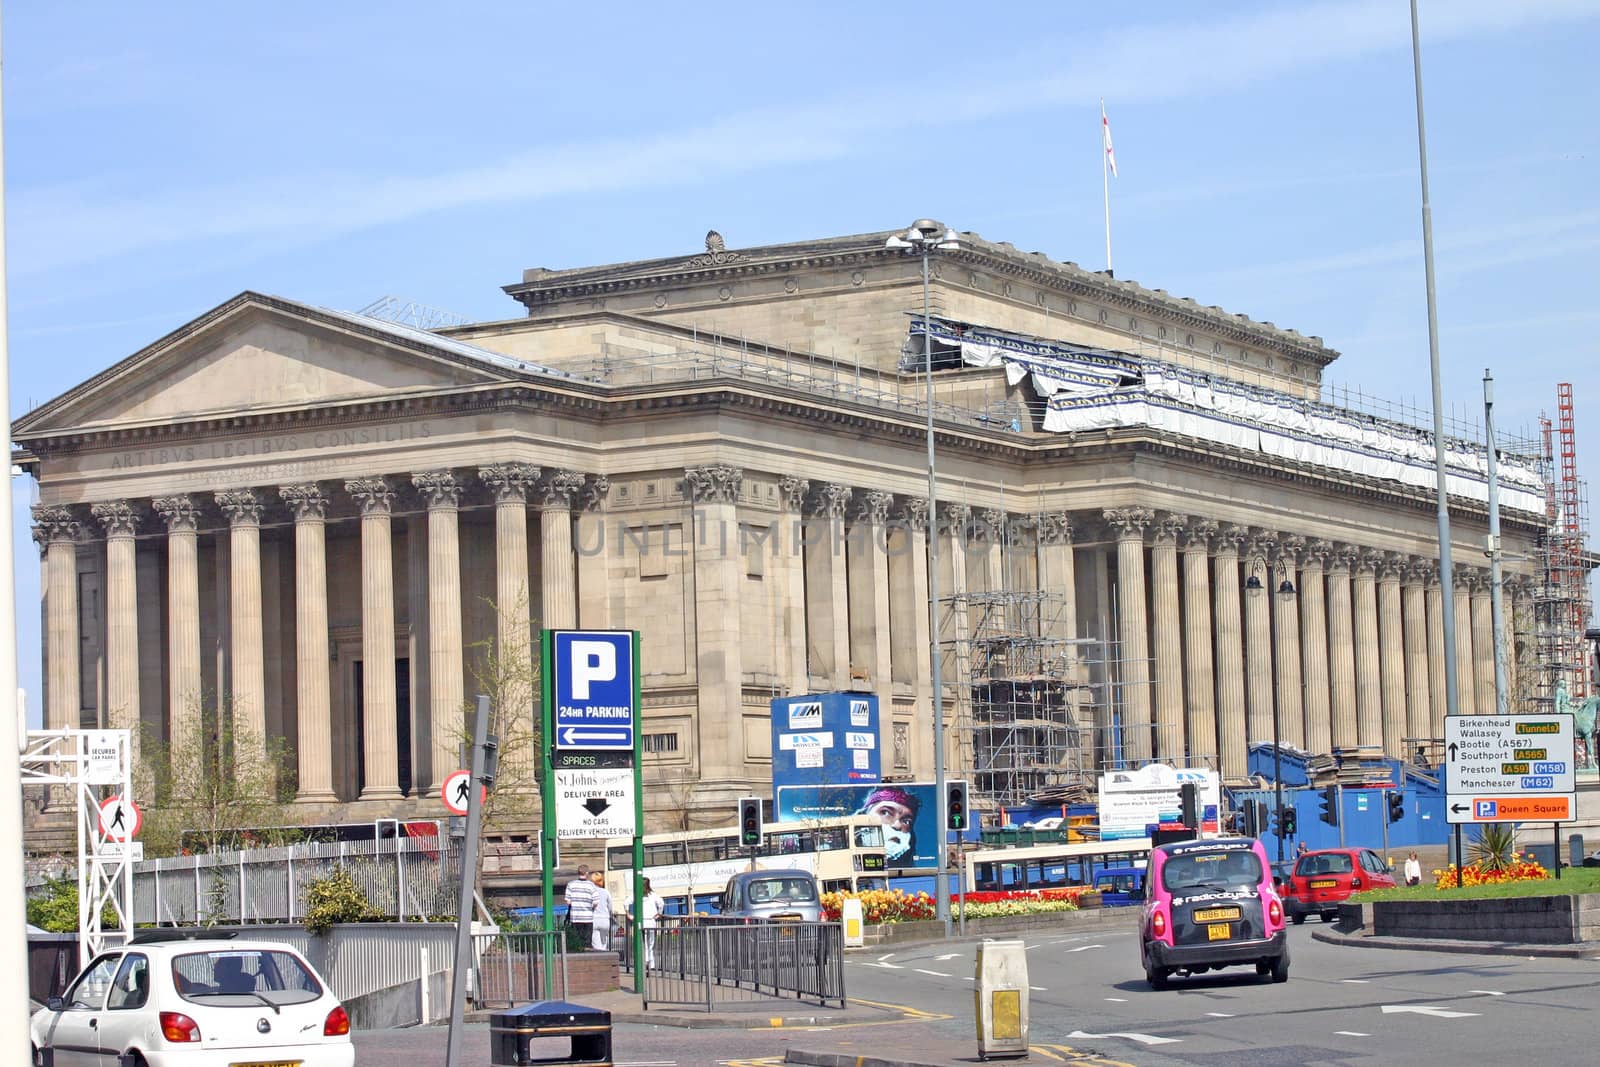 St Georges Hall and Traffic in Liverpool by green308